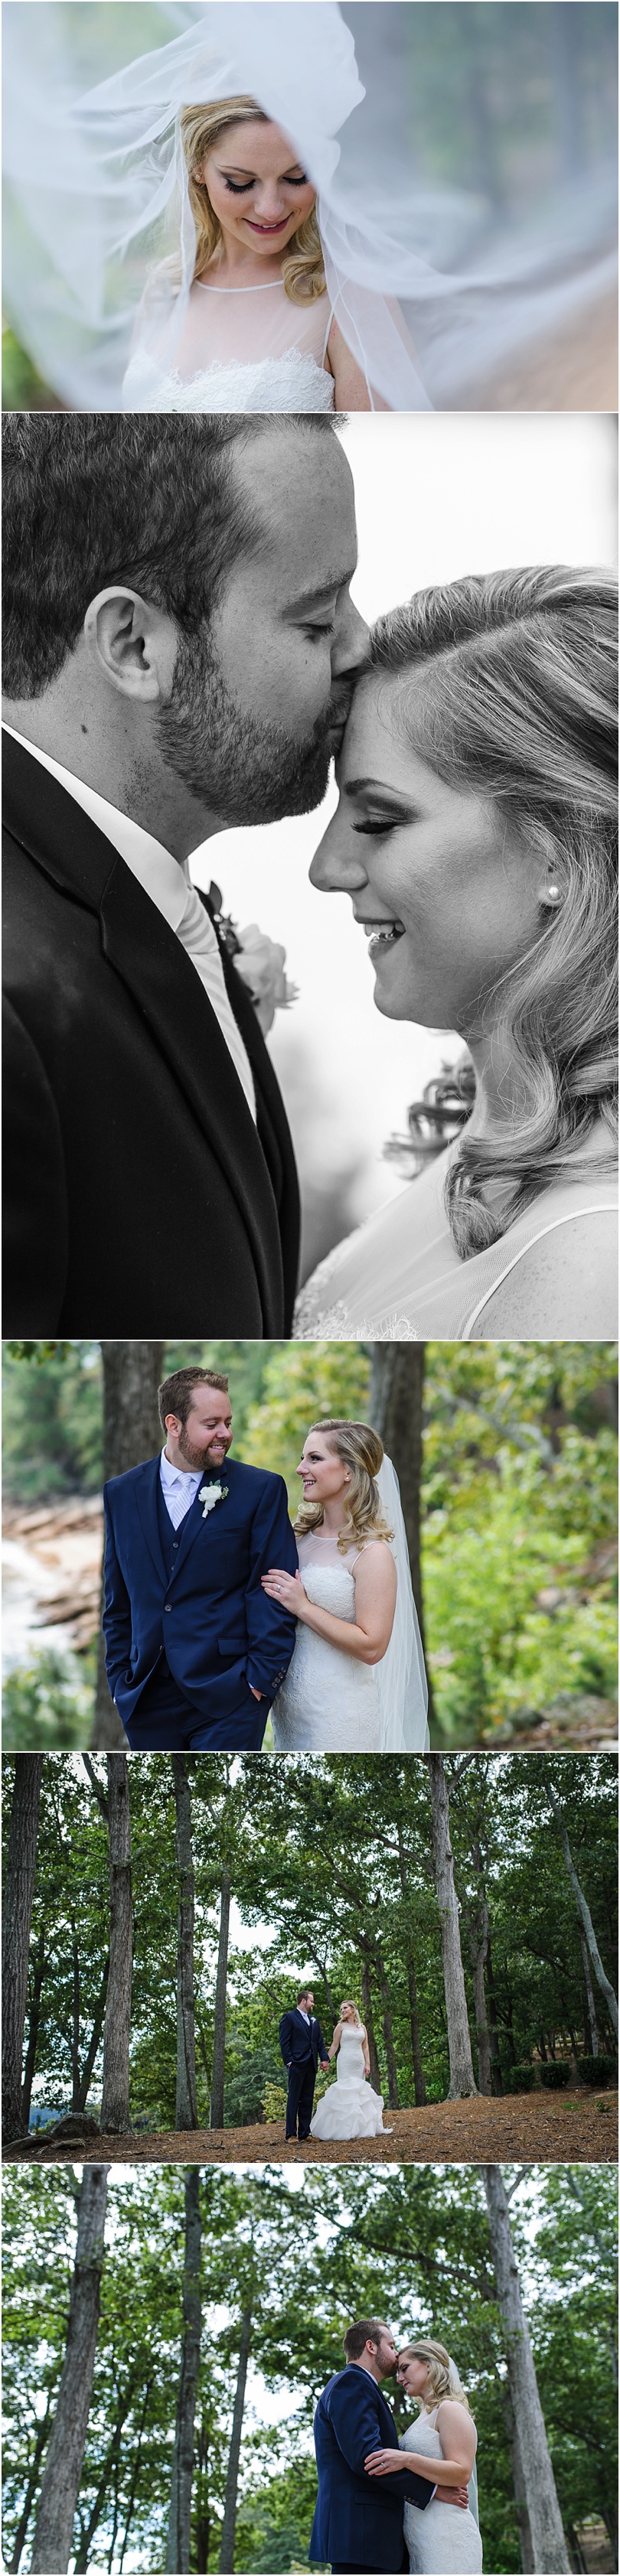 The forest area gave us some open shade for portraits after an intimate ceremony with close family and friends